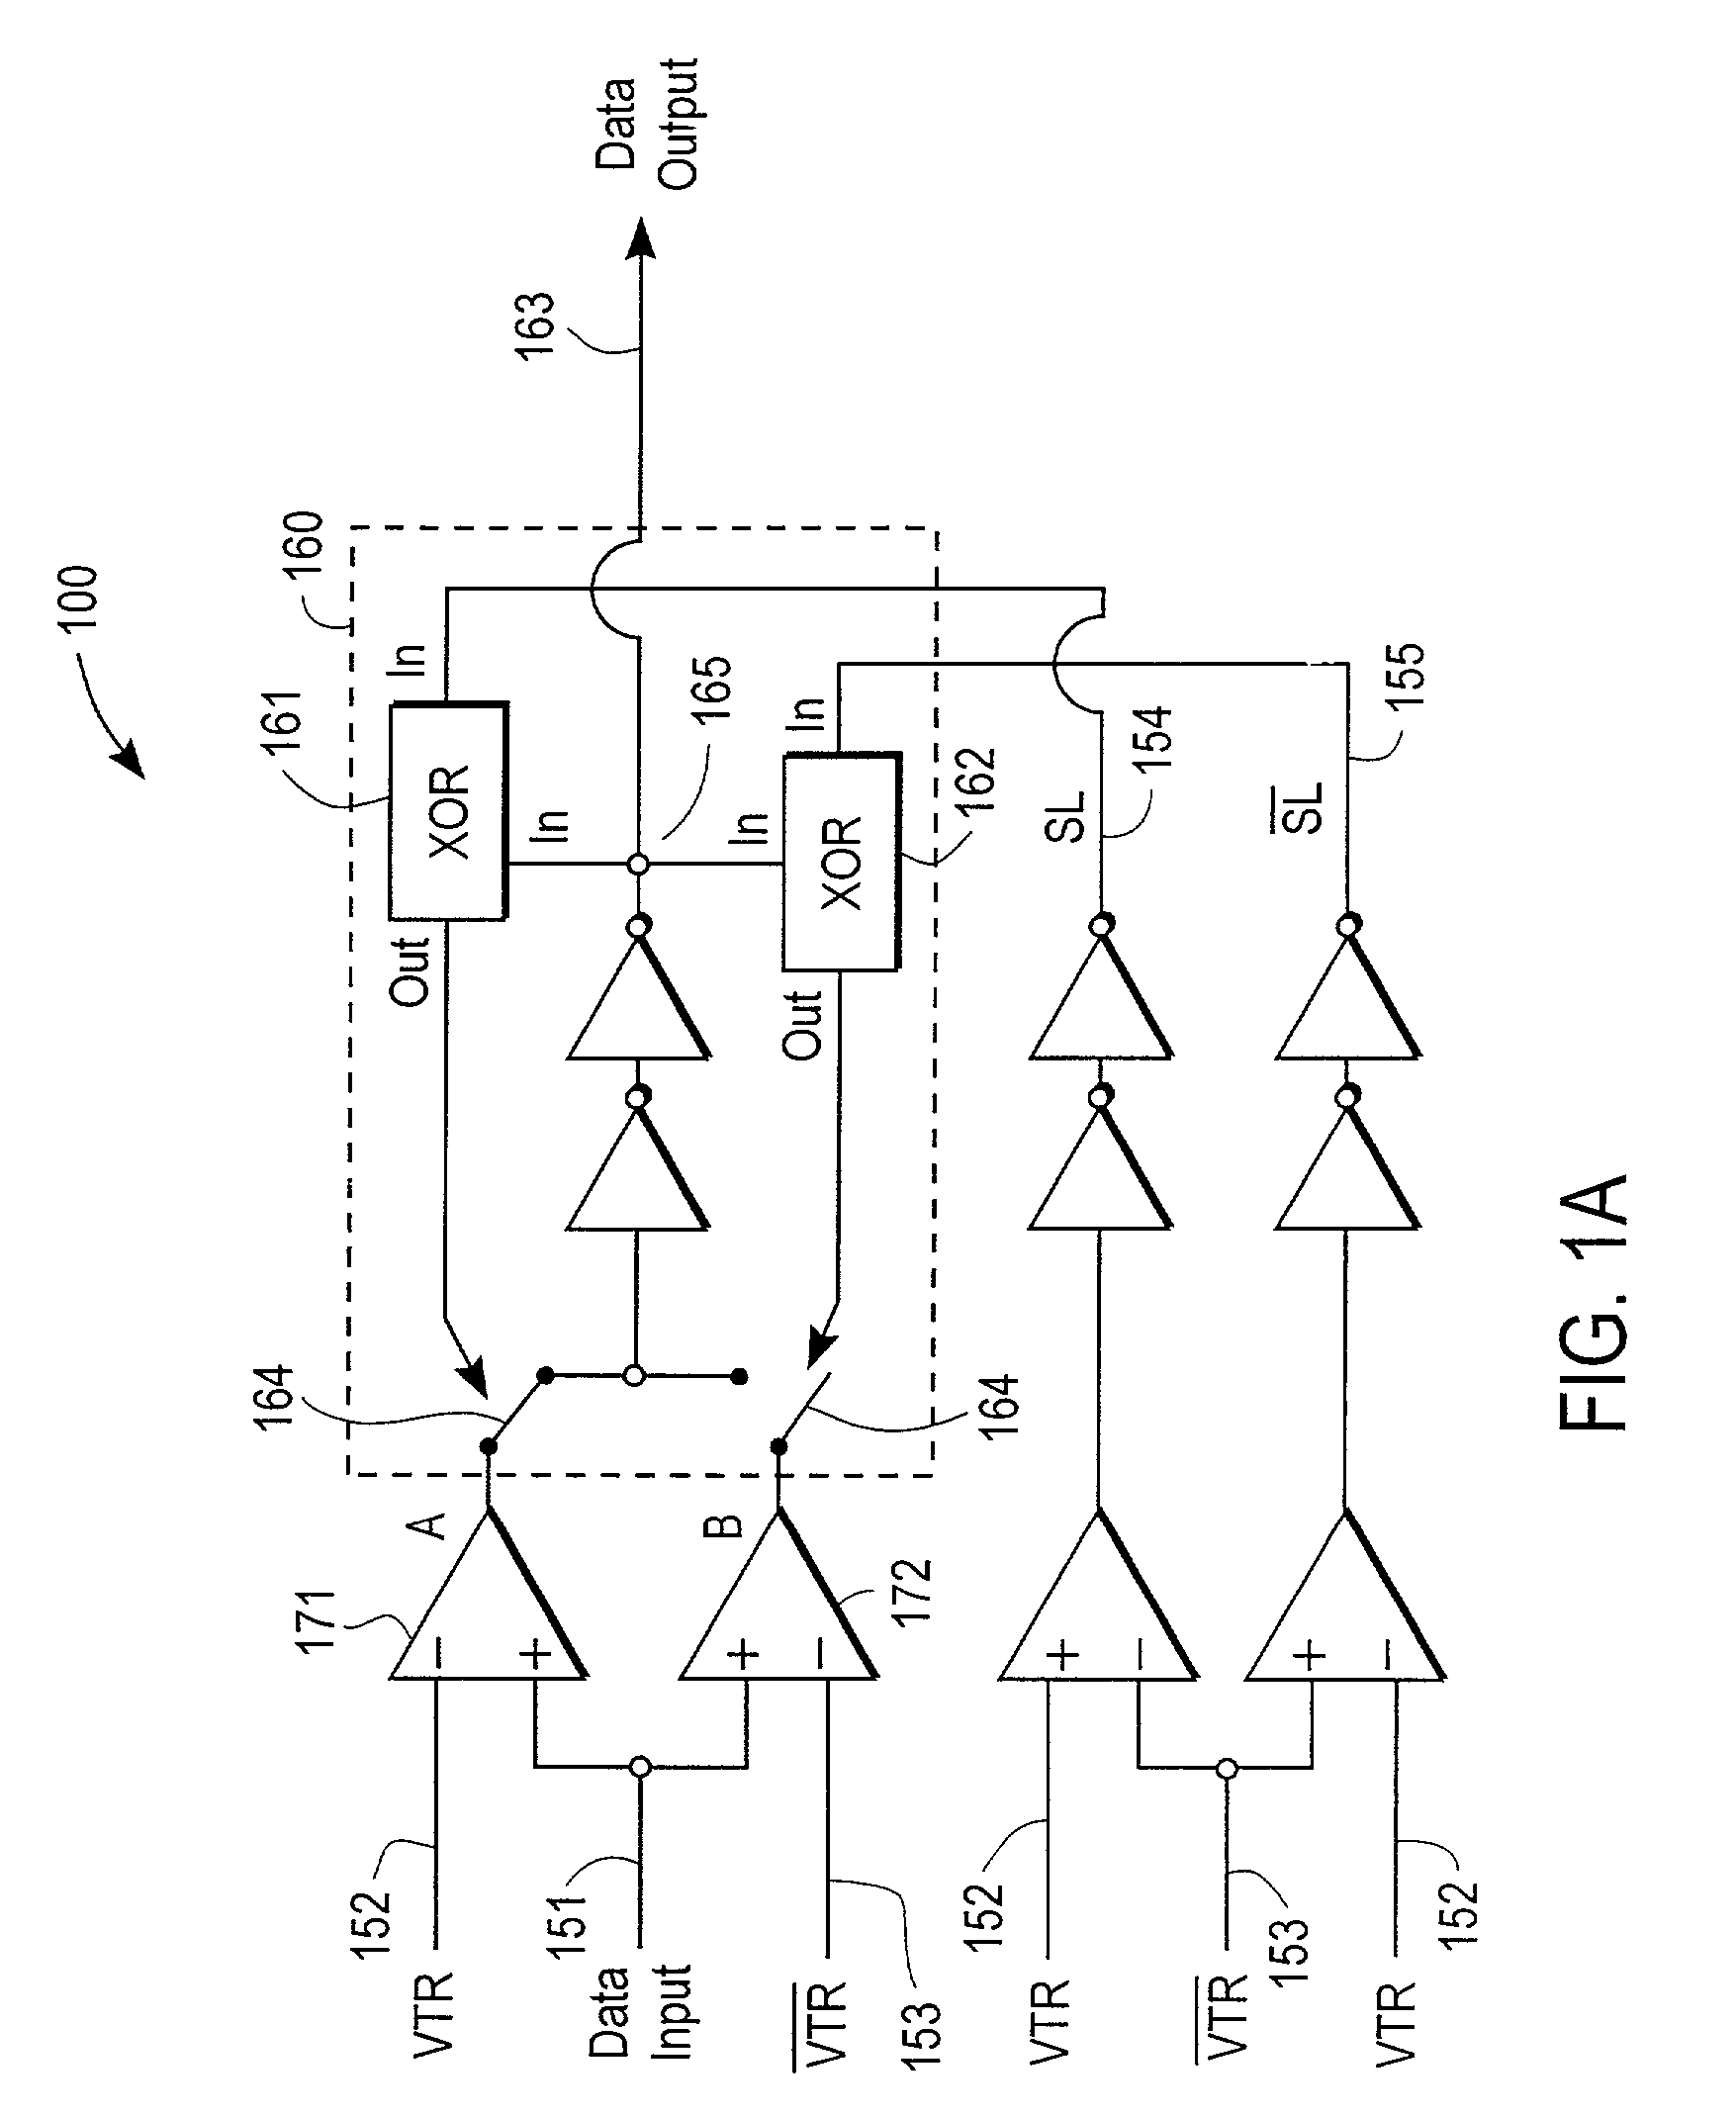 Method and system for deskewing parallel bus channels to increase data transfer rates